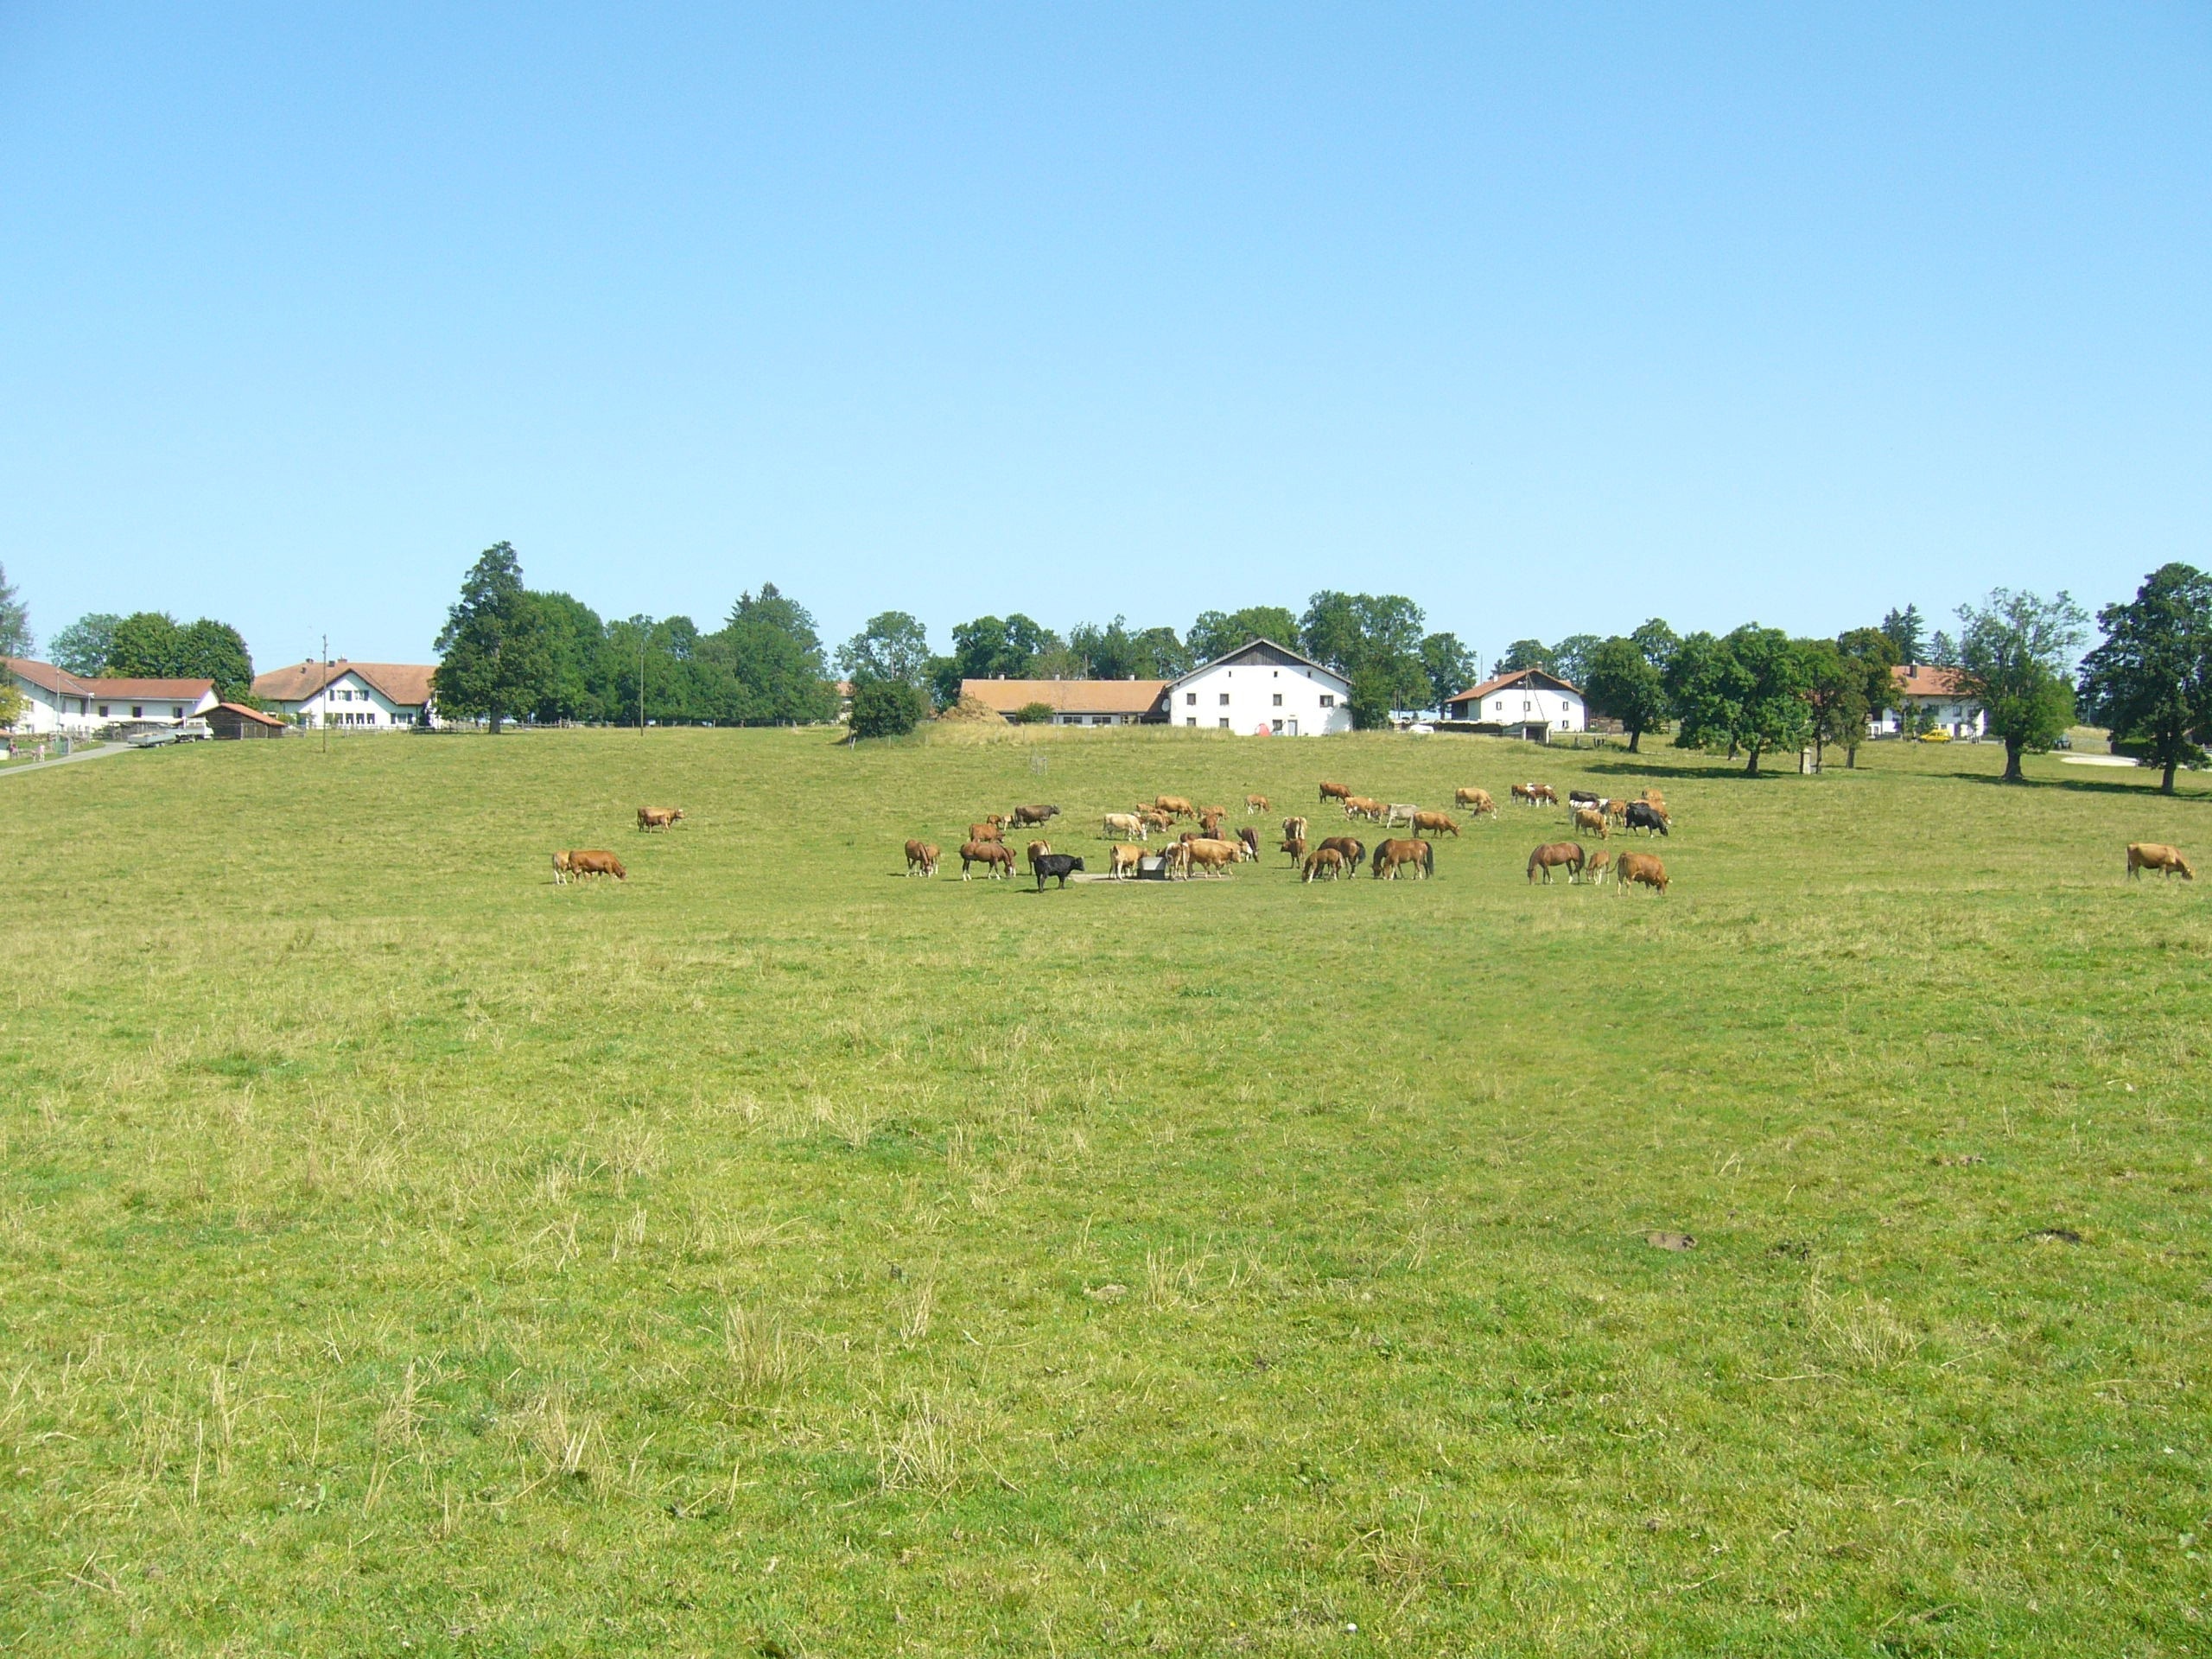 herd of horse in the green lawn